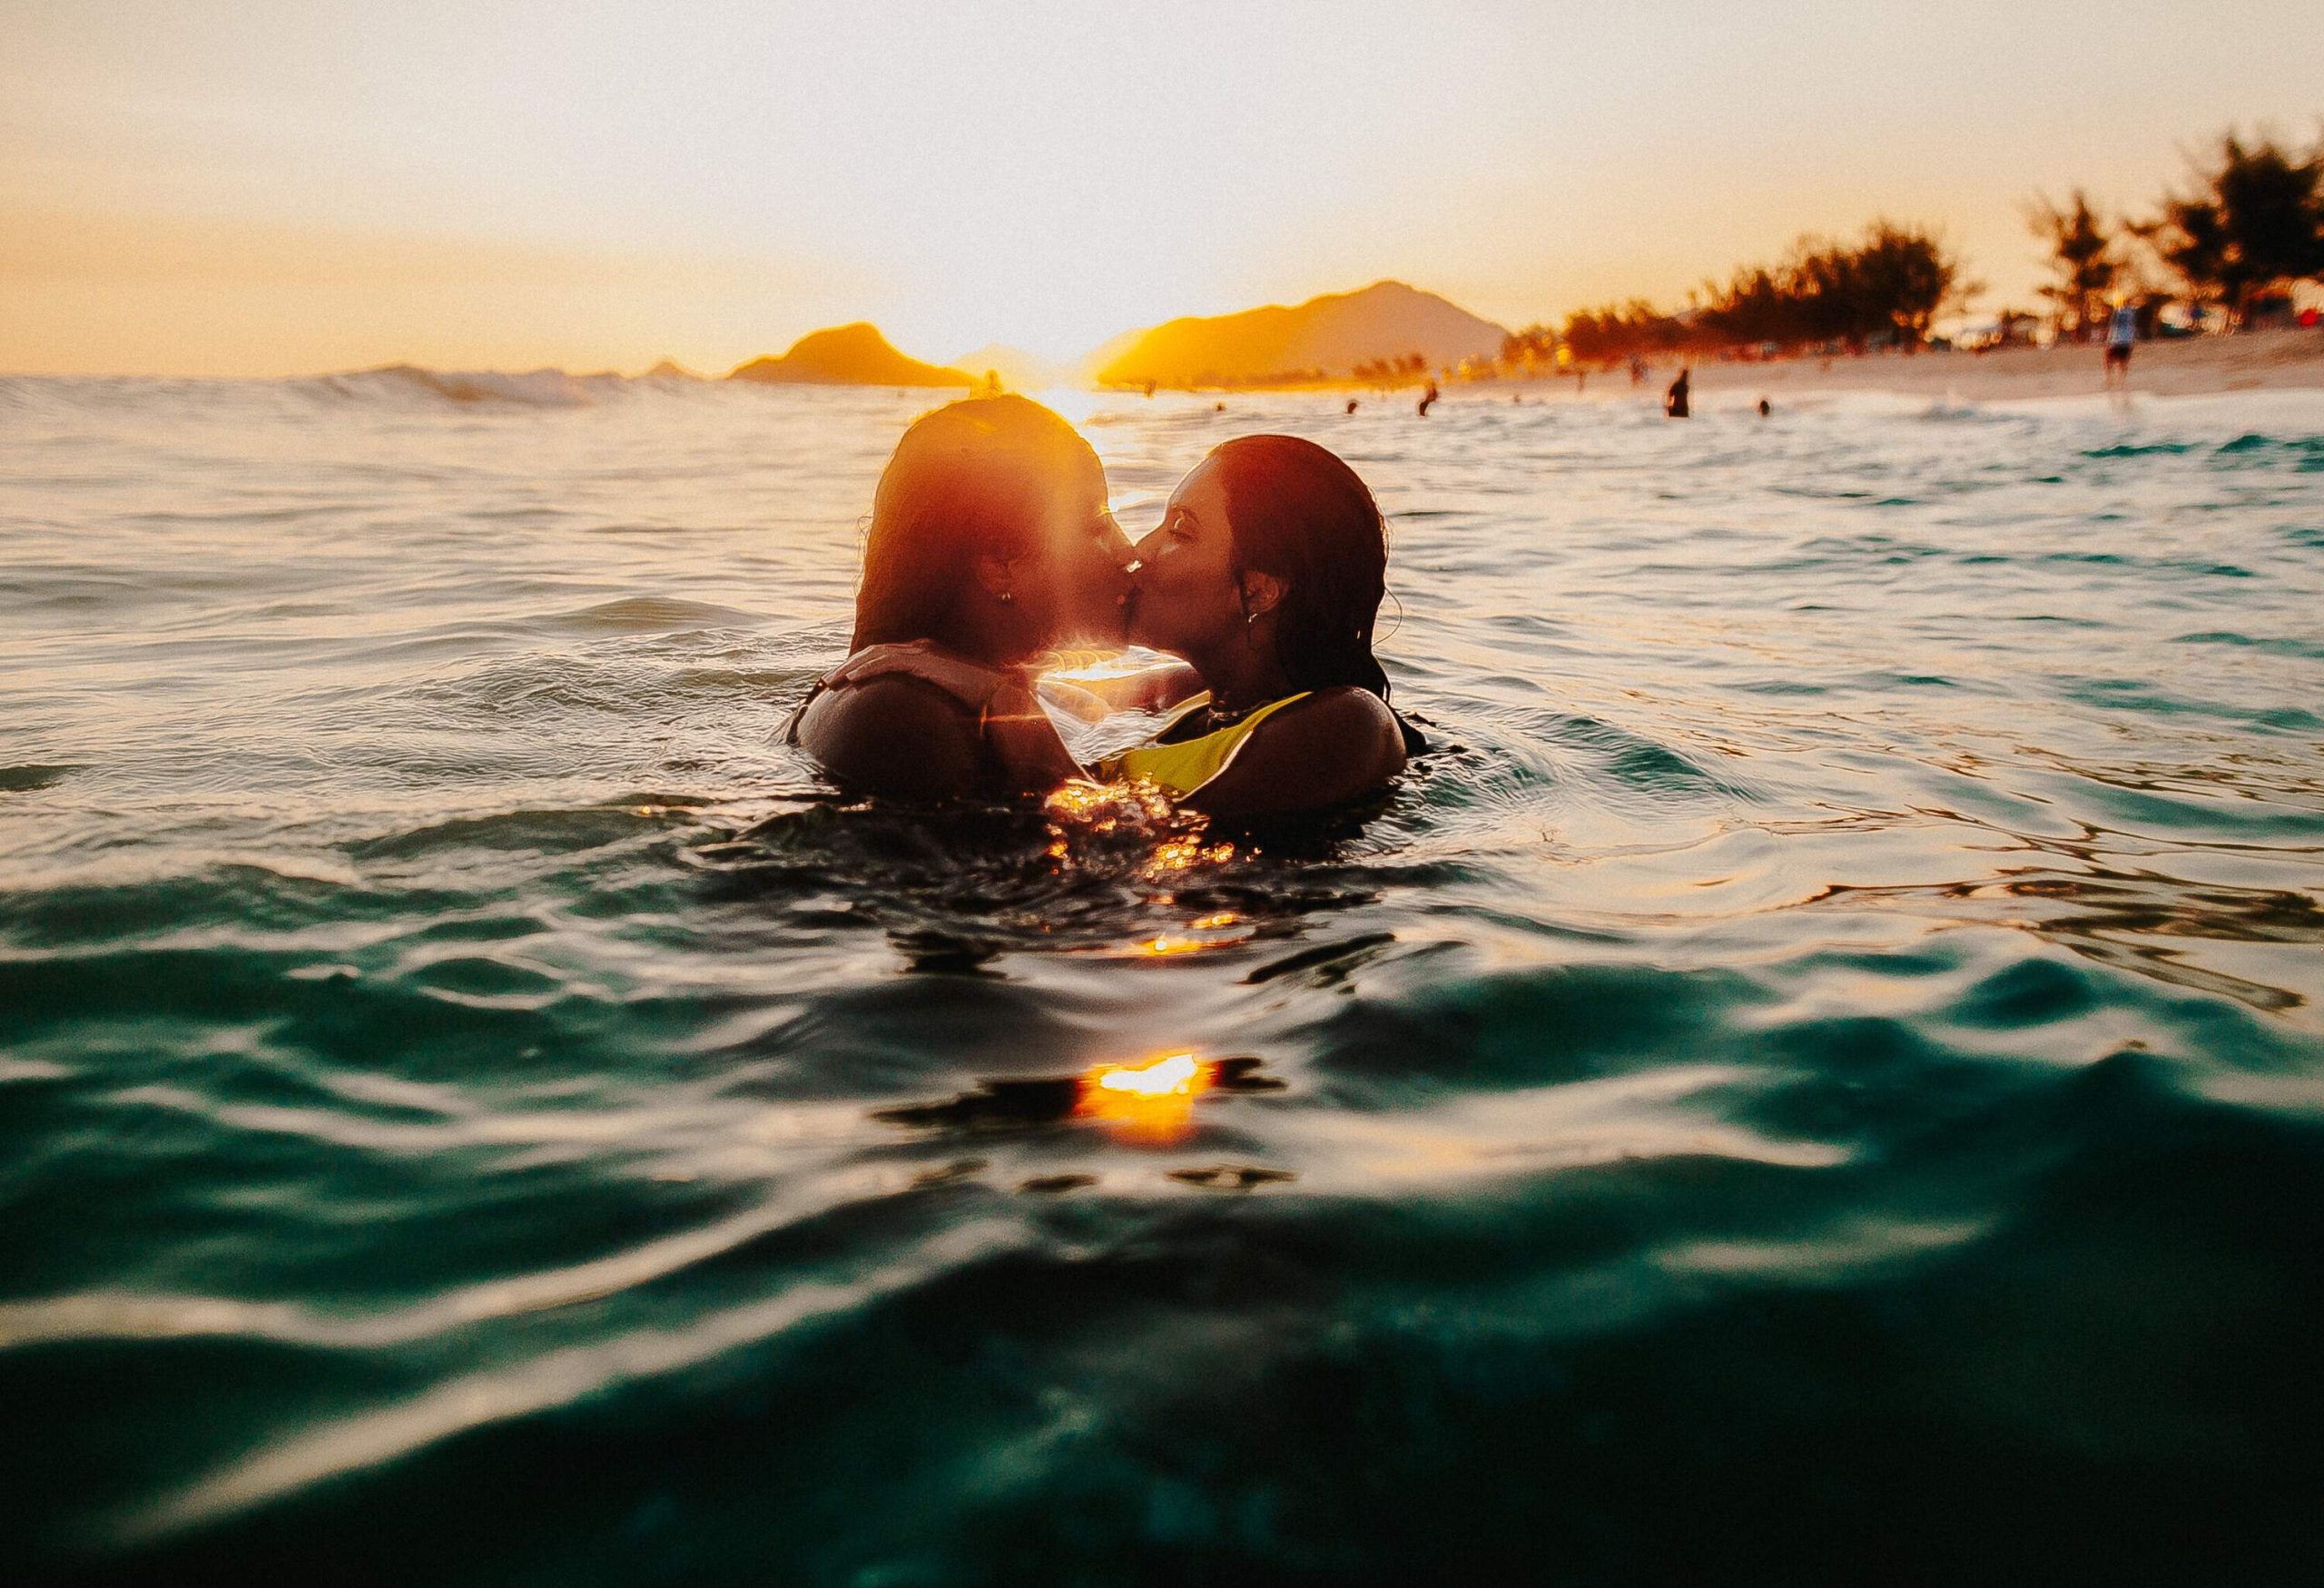 A female couple shares a kiss while immersed in sea water with the sun setting in the background.